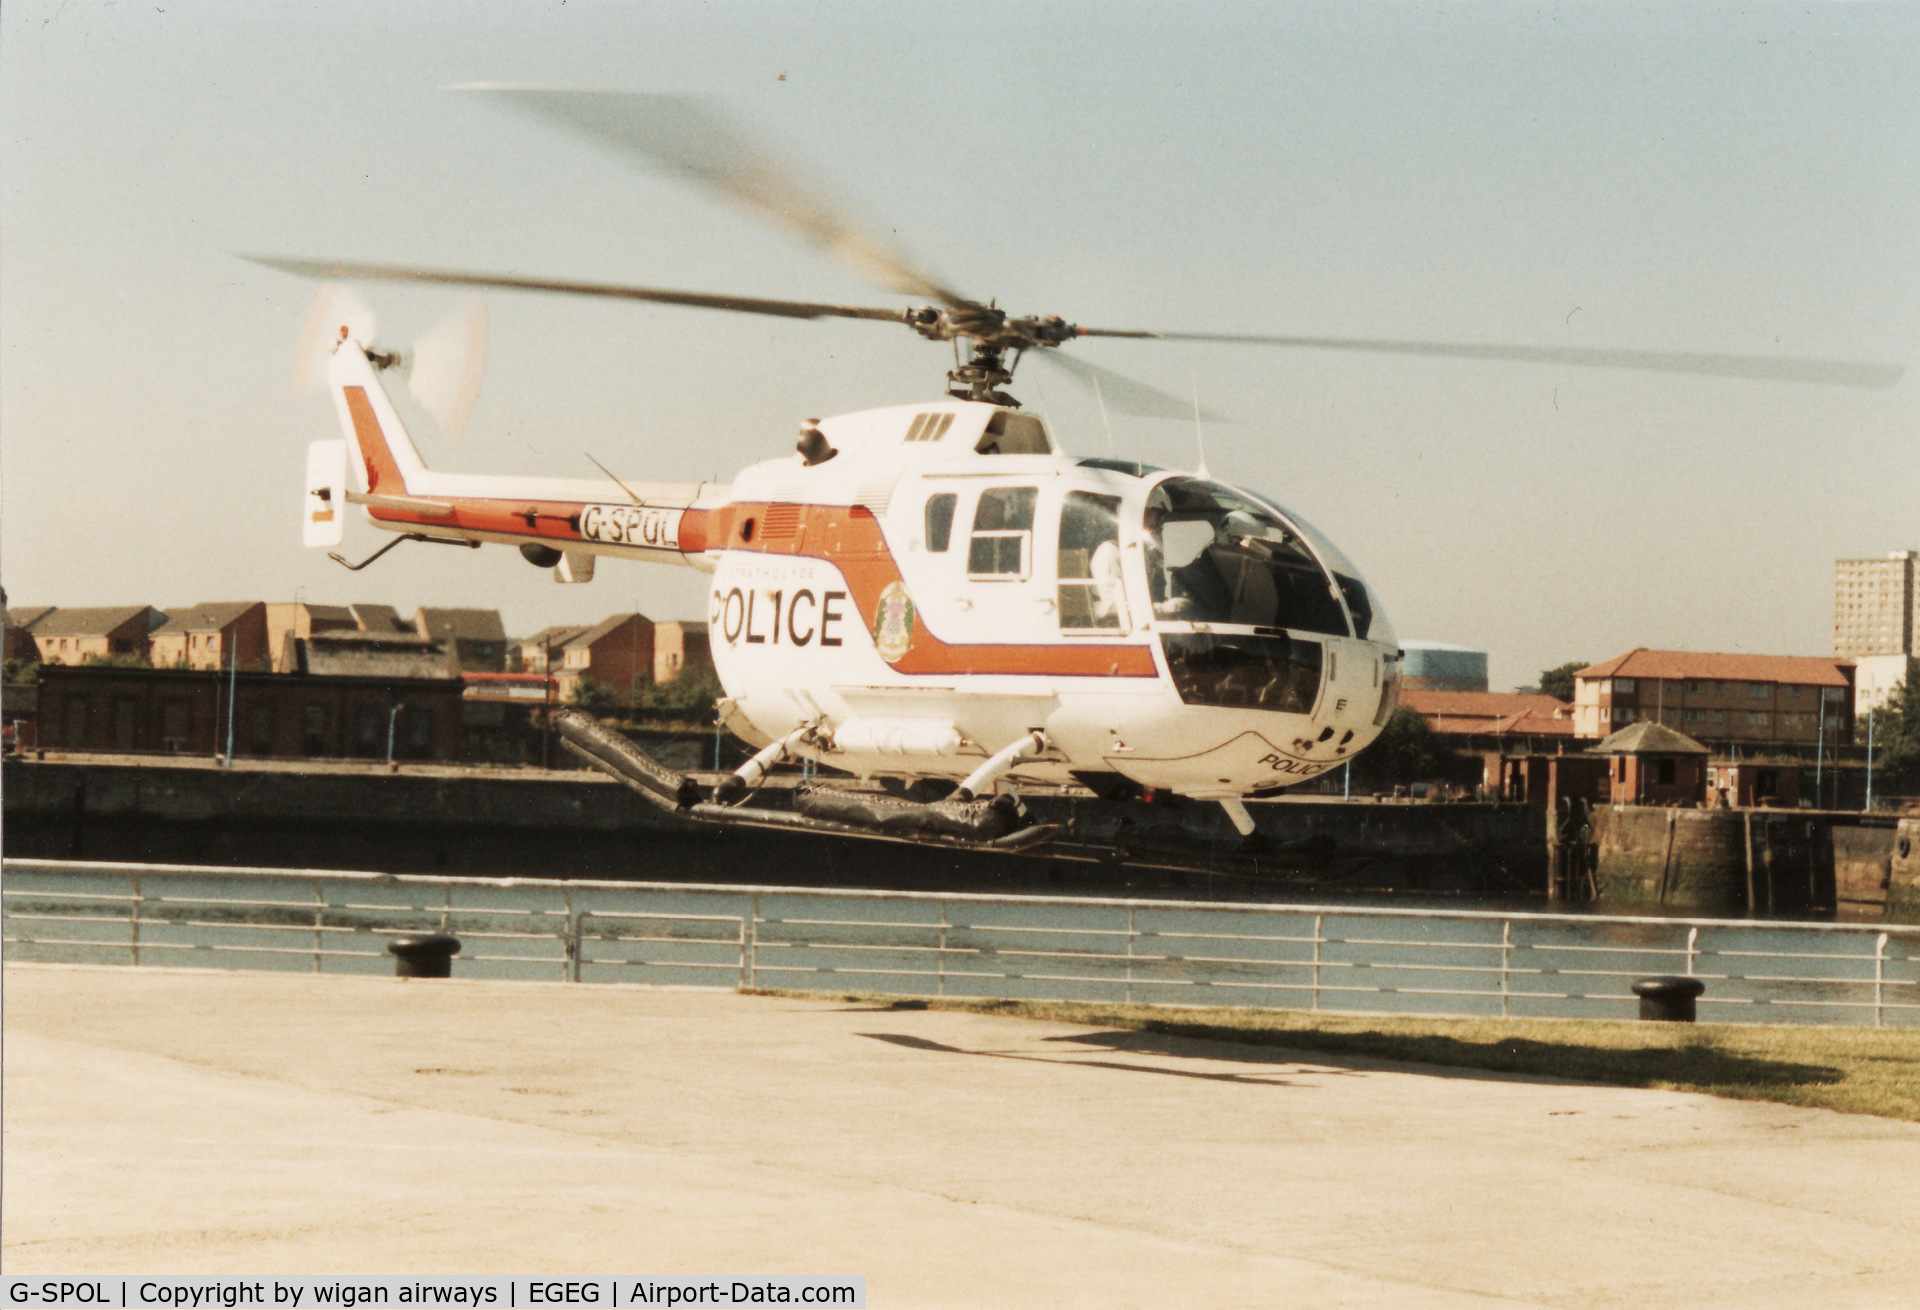 G-SPOL, 1979 MBB Bo-105DBS-4 C/N S-392, with the Strathclyde Police